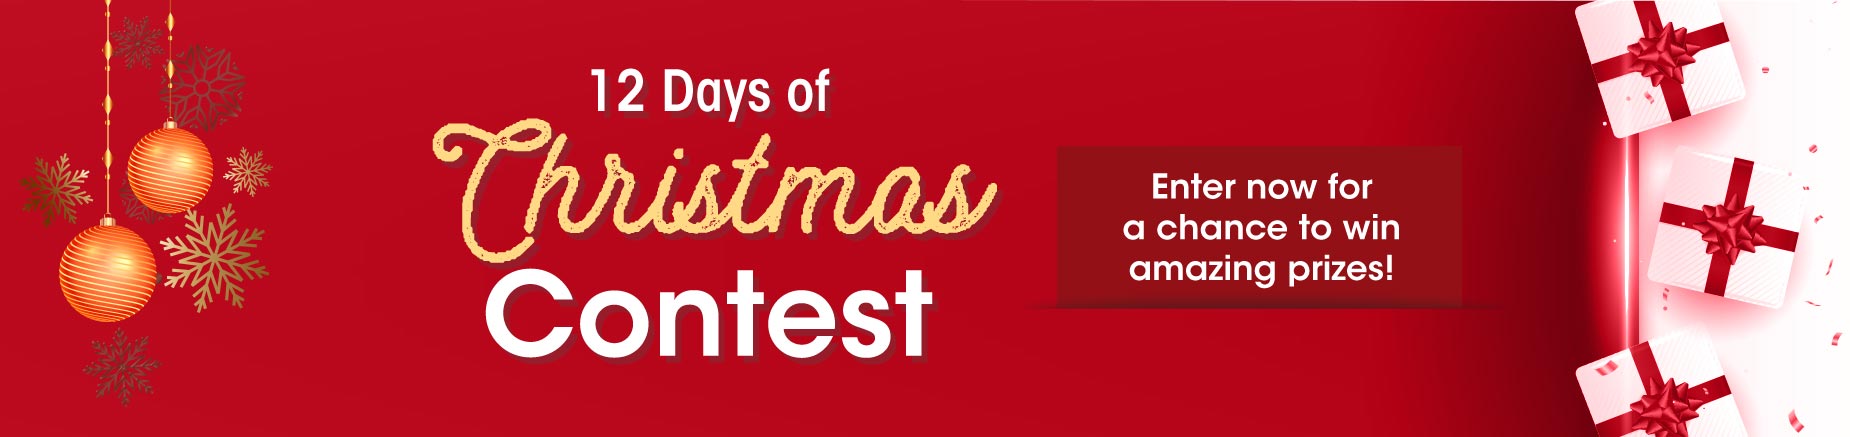 Christmas Contest Banner